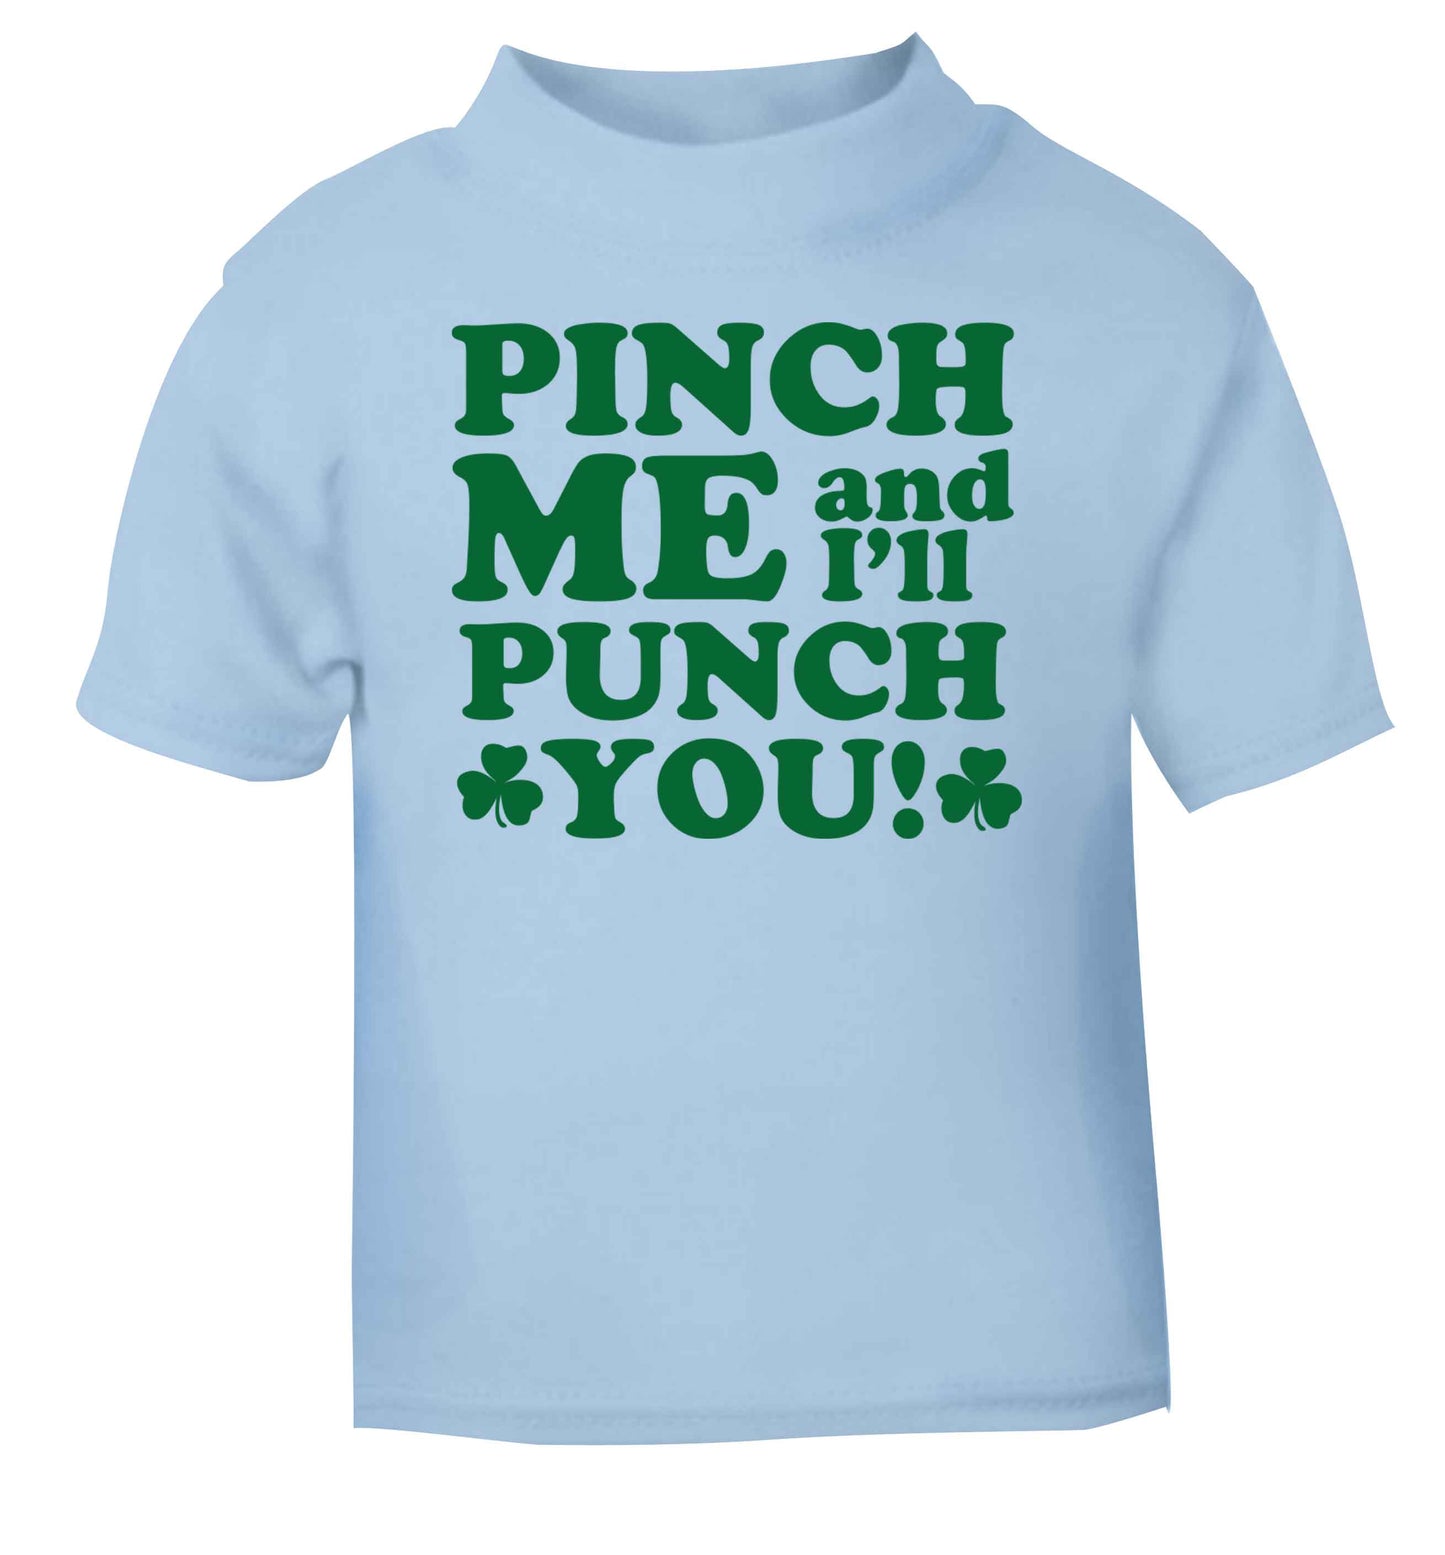 Pinch me and I'll punch you light blue baby toddler Tshirt 2 Years